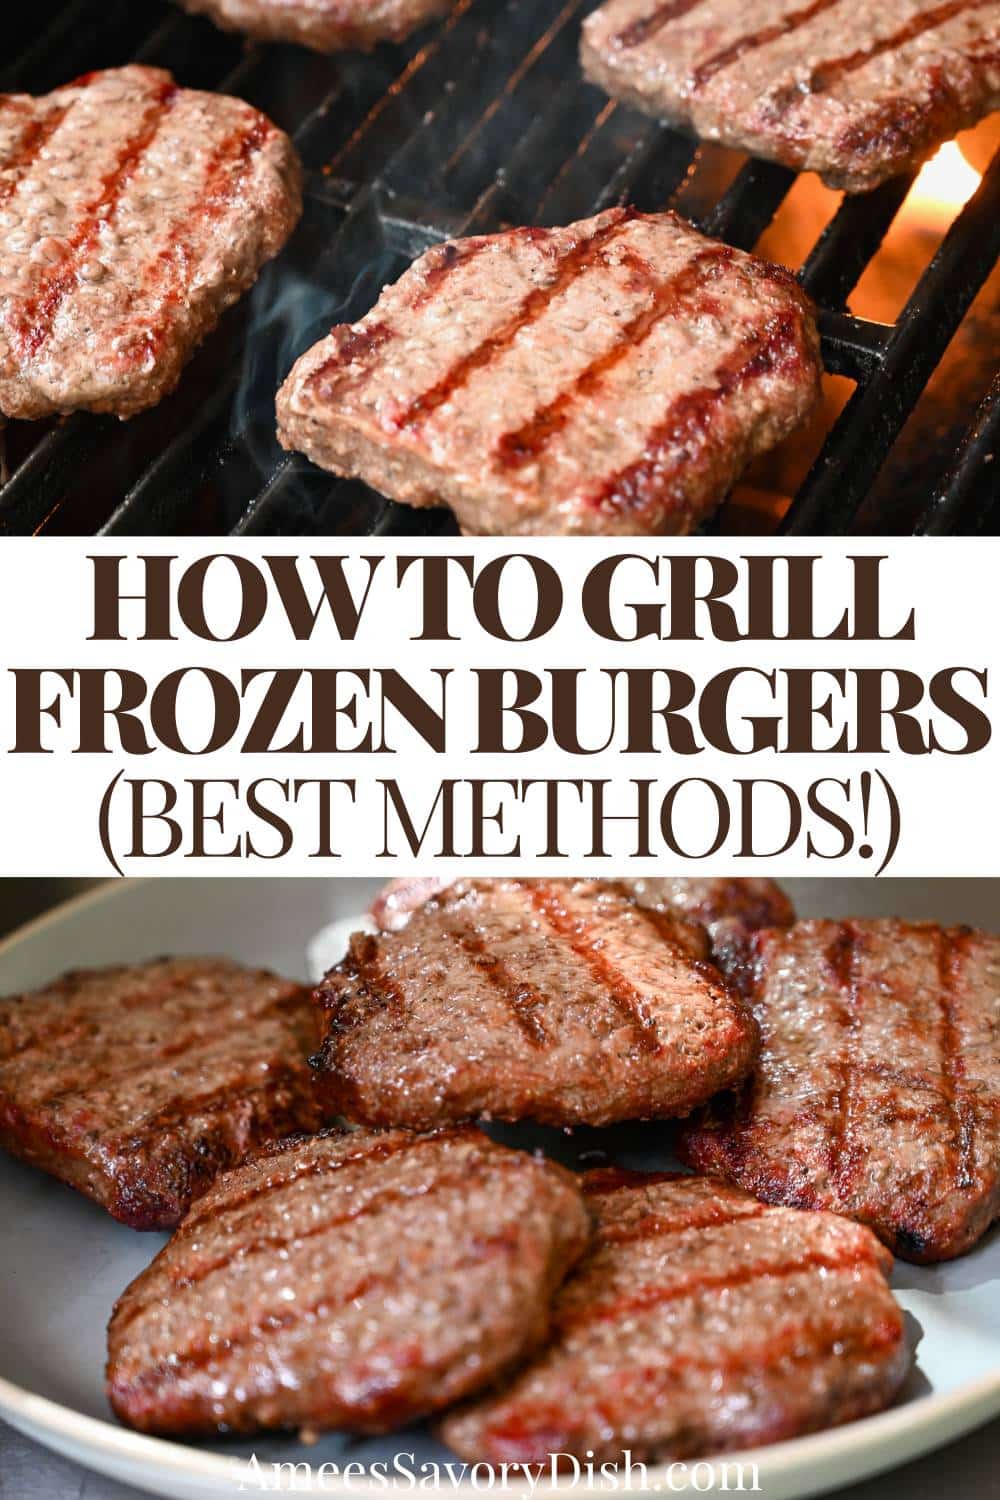 Learn How to Grill Frozen Burgers without thawing! This comprehensive guide provides step-by-step instructions for grilling perfectly cooked frozen burger patties outdoors using a gas, charcoal, smoker, or indoor grill.  via @Ameessavorydish